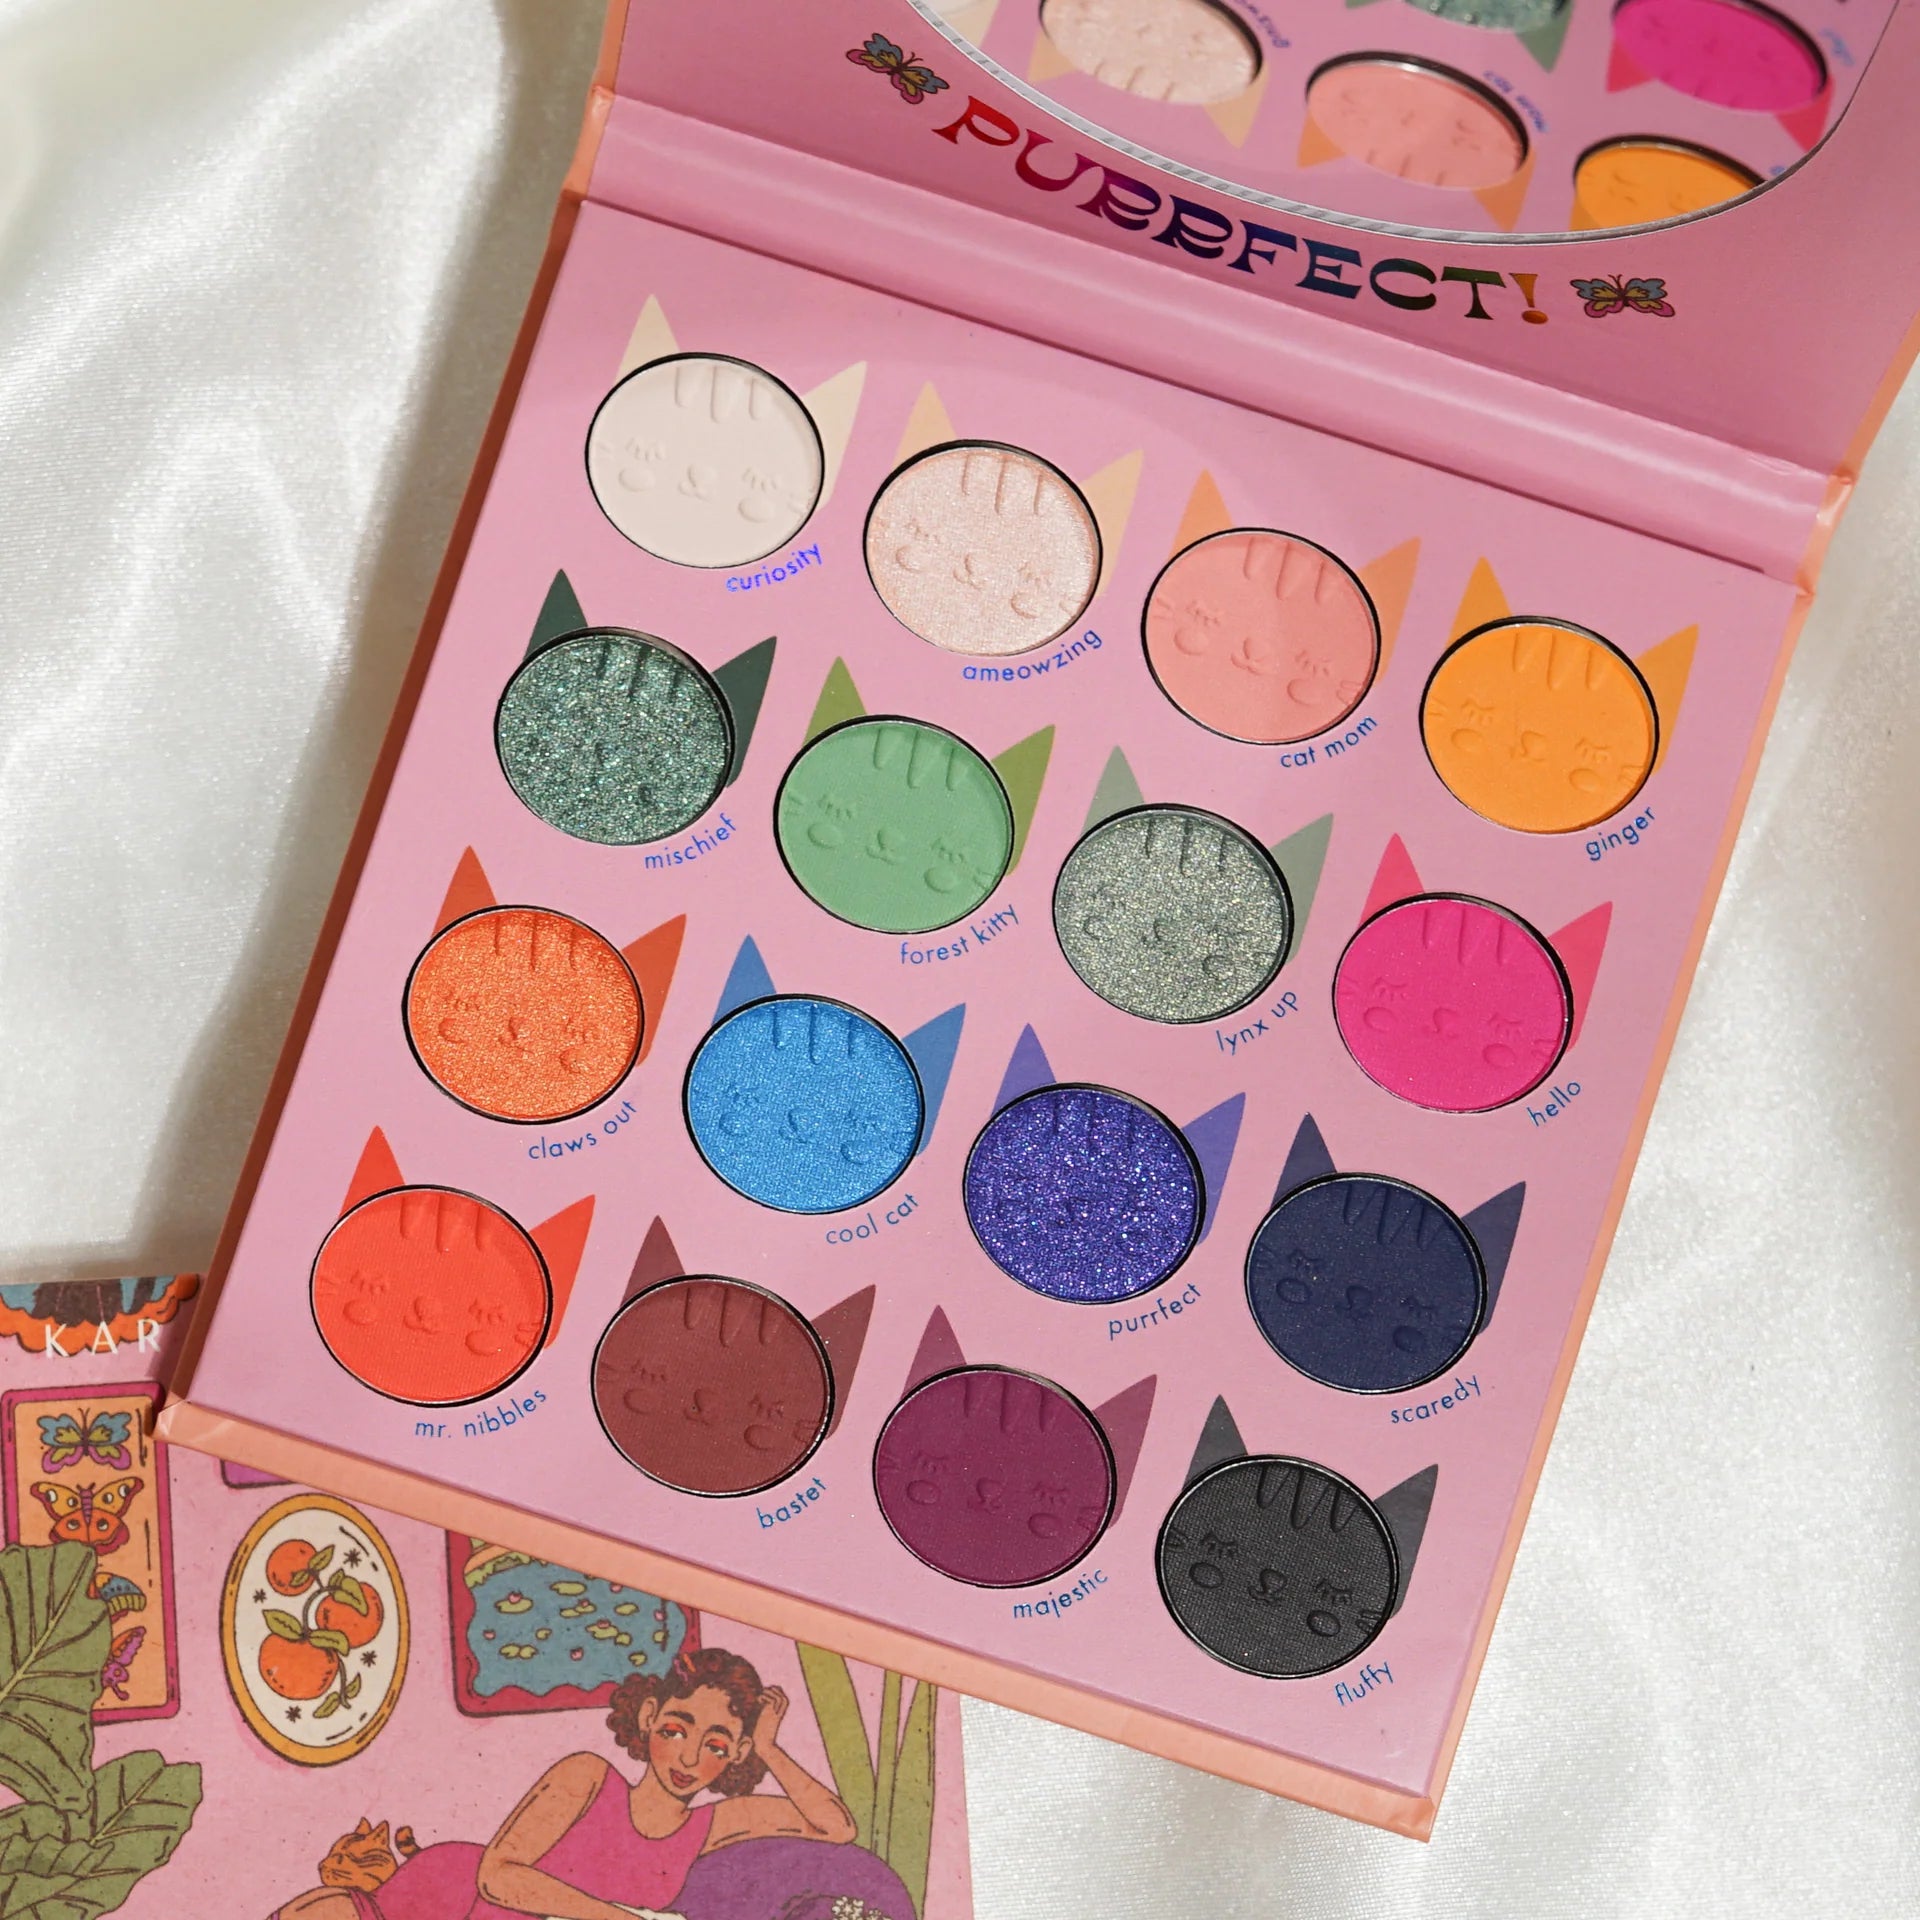 Kara Beauty - Moment to Paws Palette